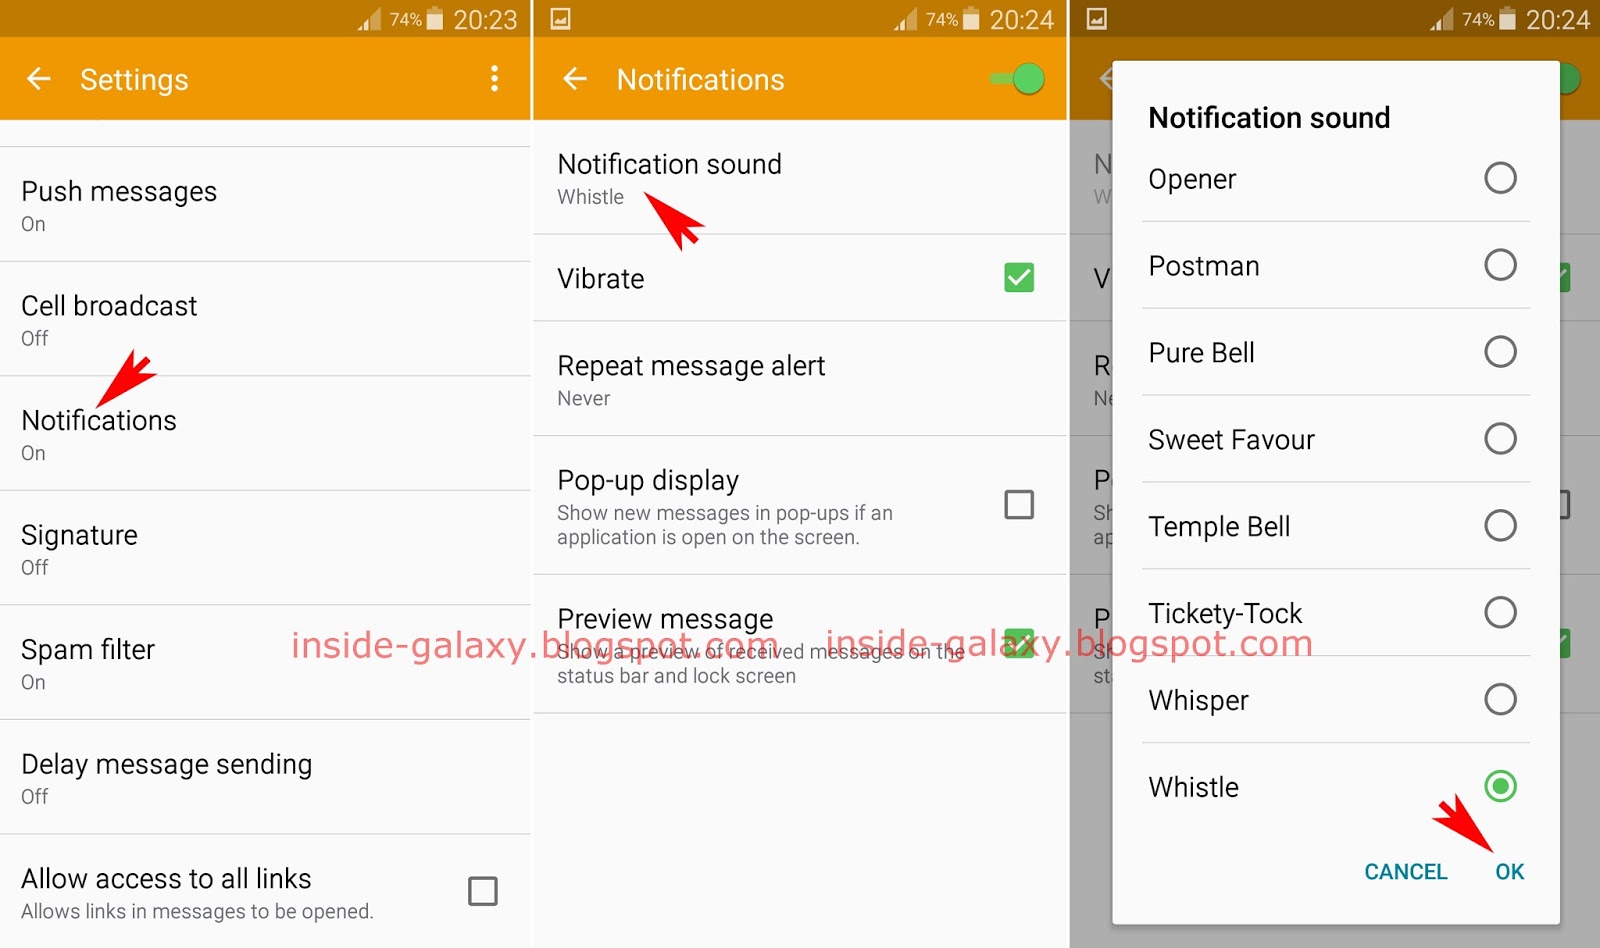 ... Fix No Notification Sound when New Messages Arrive in Android 5.0.1